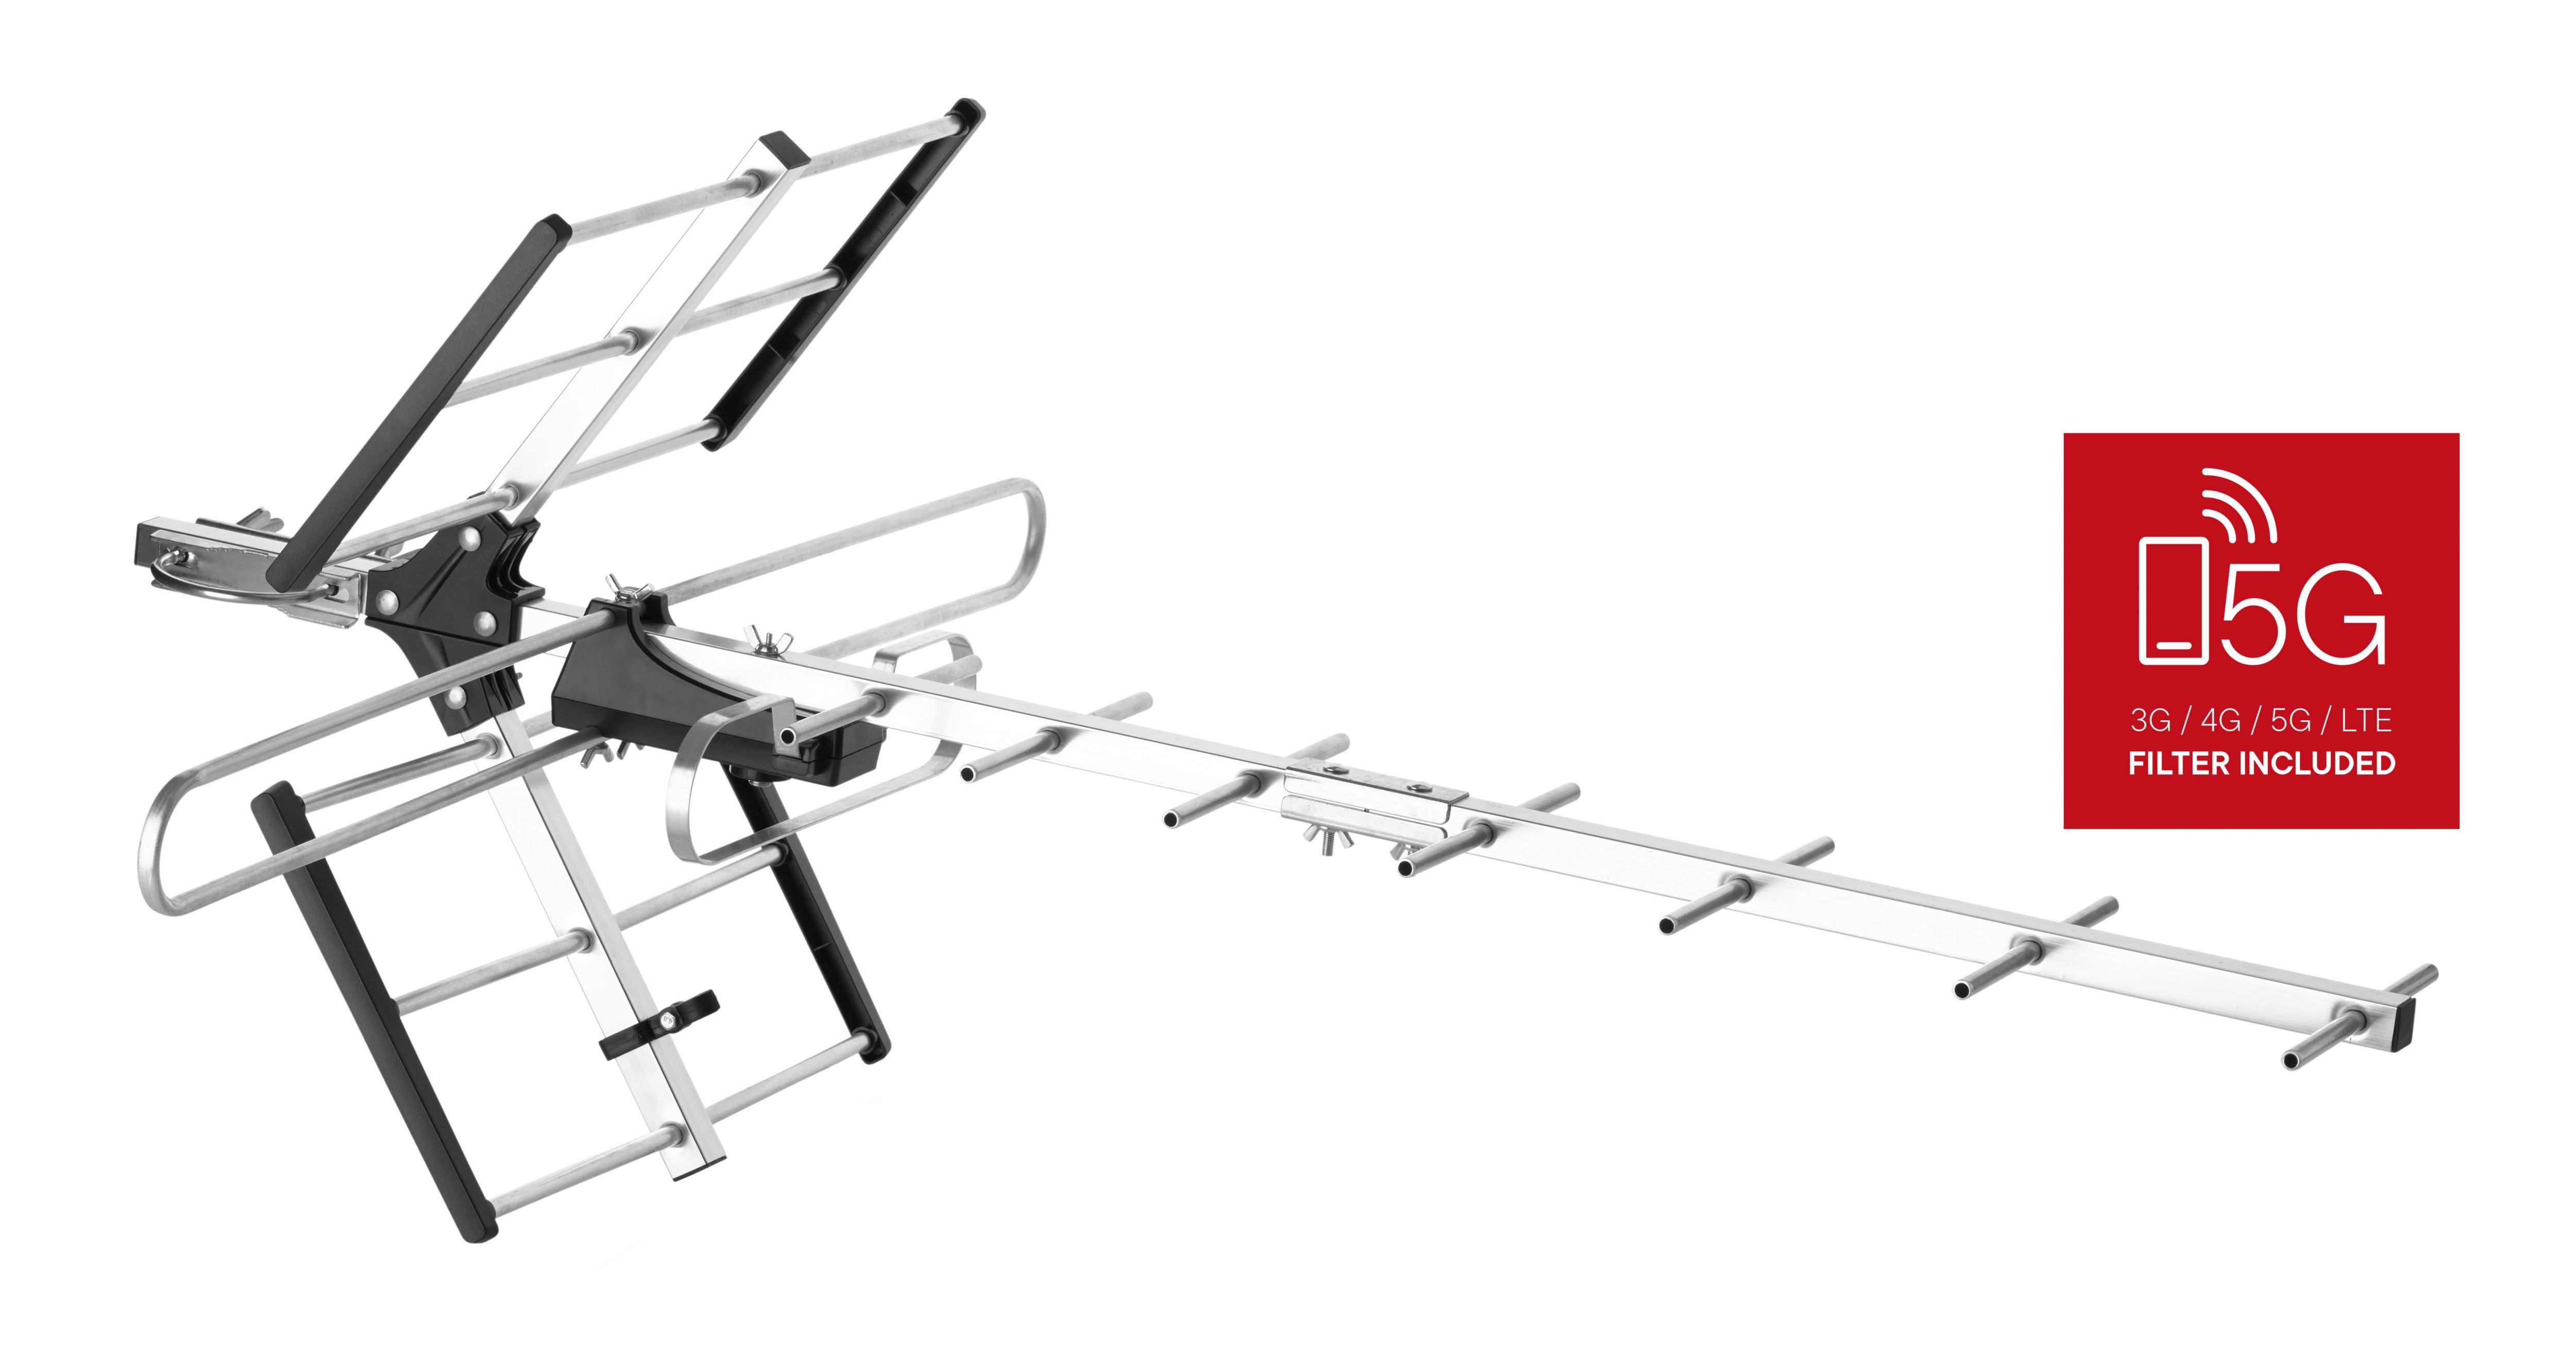 One For All Outdoor Yagi Digital TV aerial SV9357